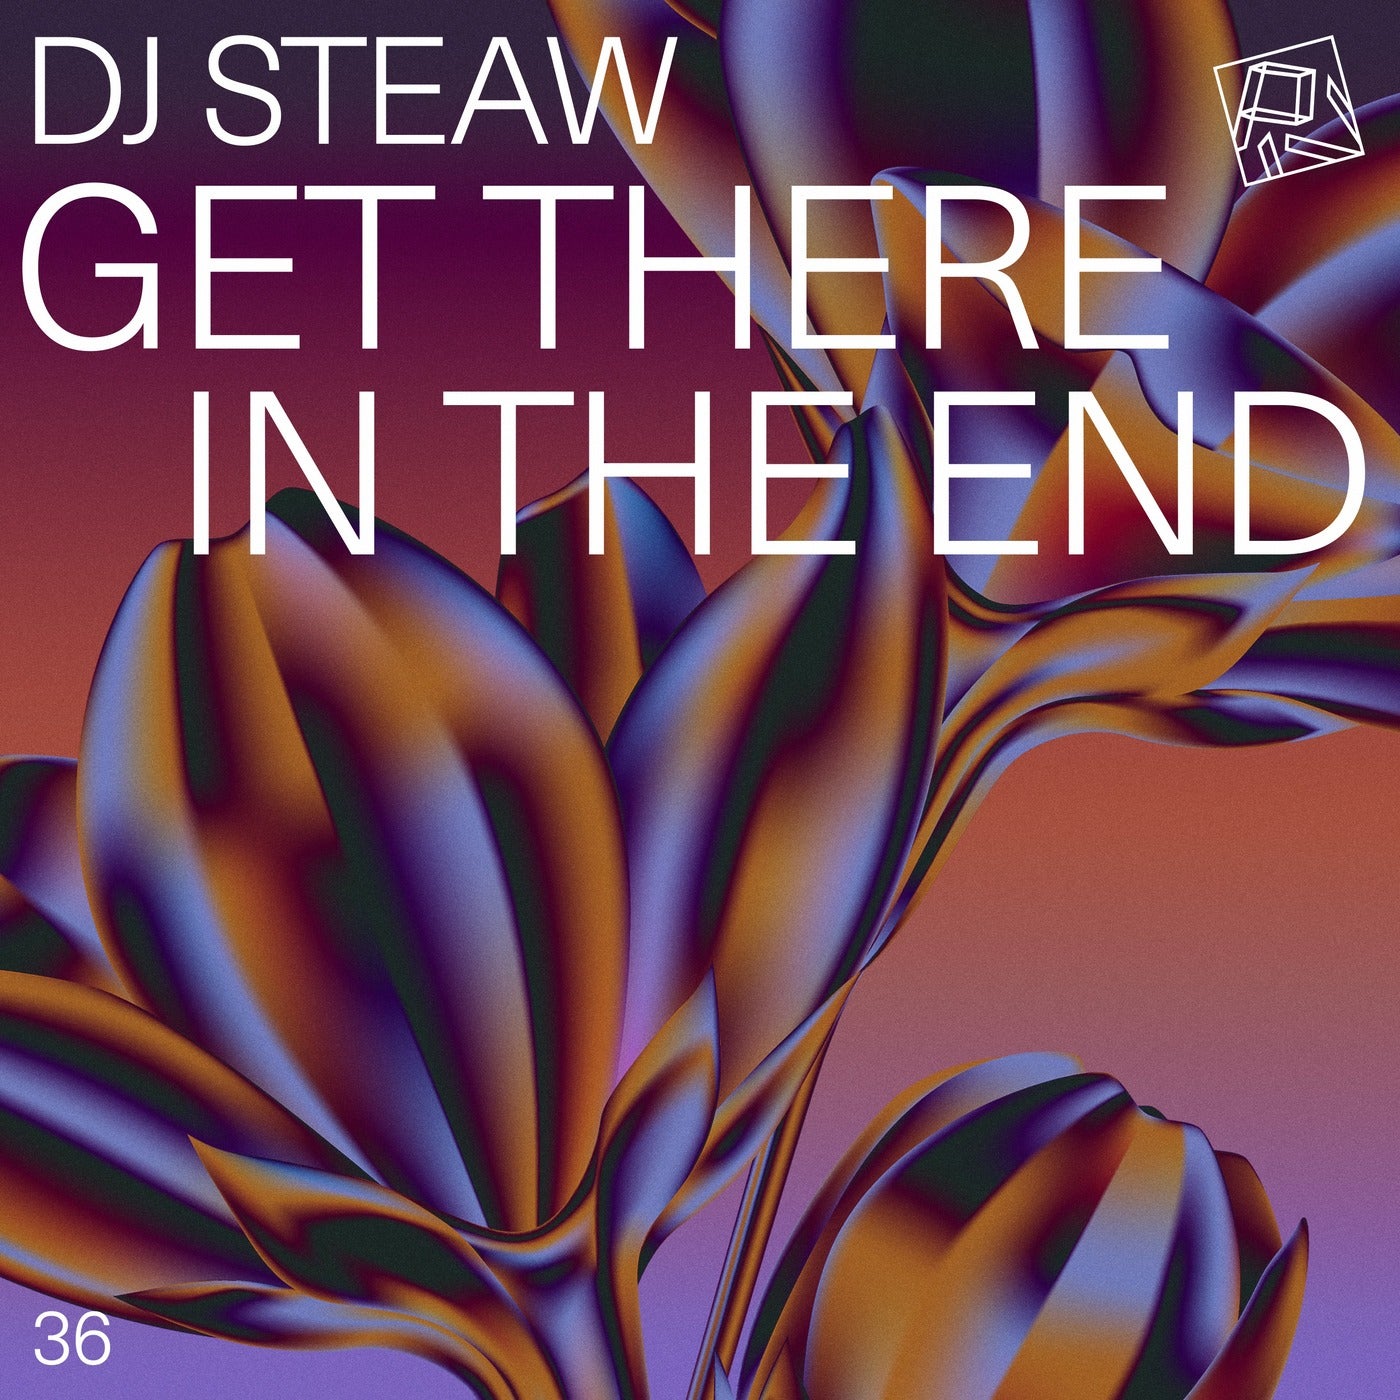 DJ Steaw – Get There In The End [PIV036]